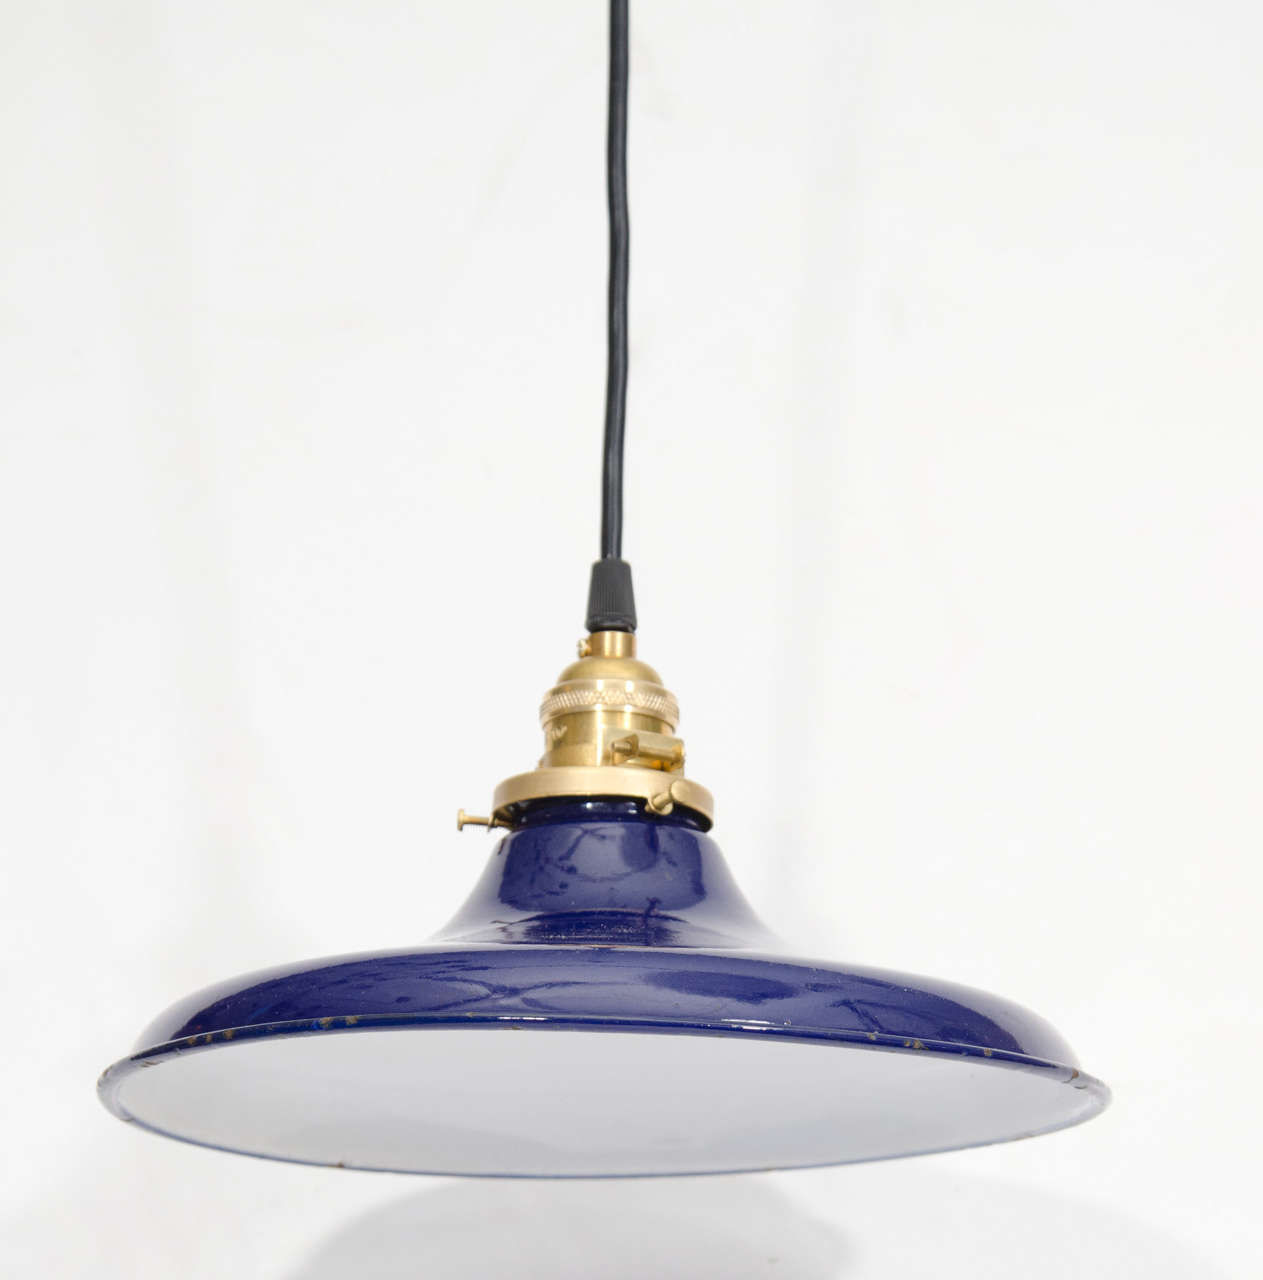 USA flared pendant lights with blue enamel shades. 
Newly wired.
